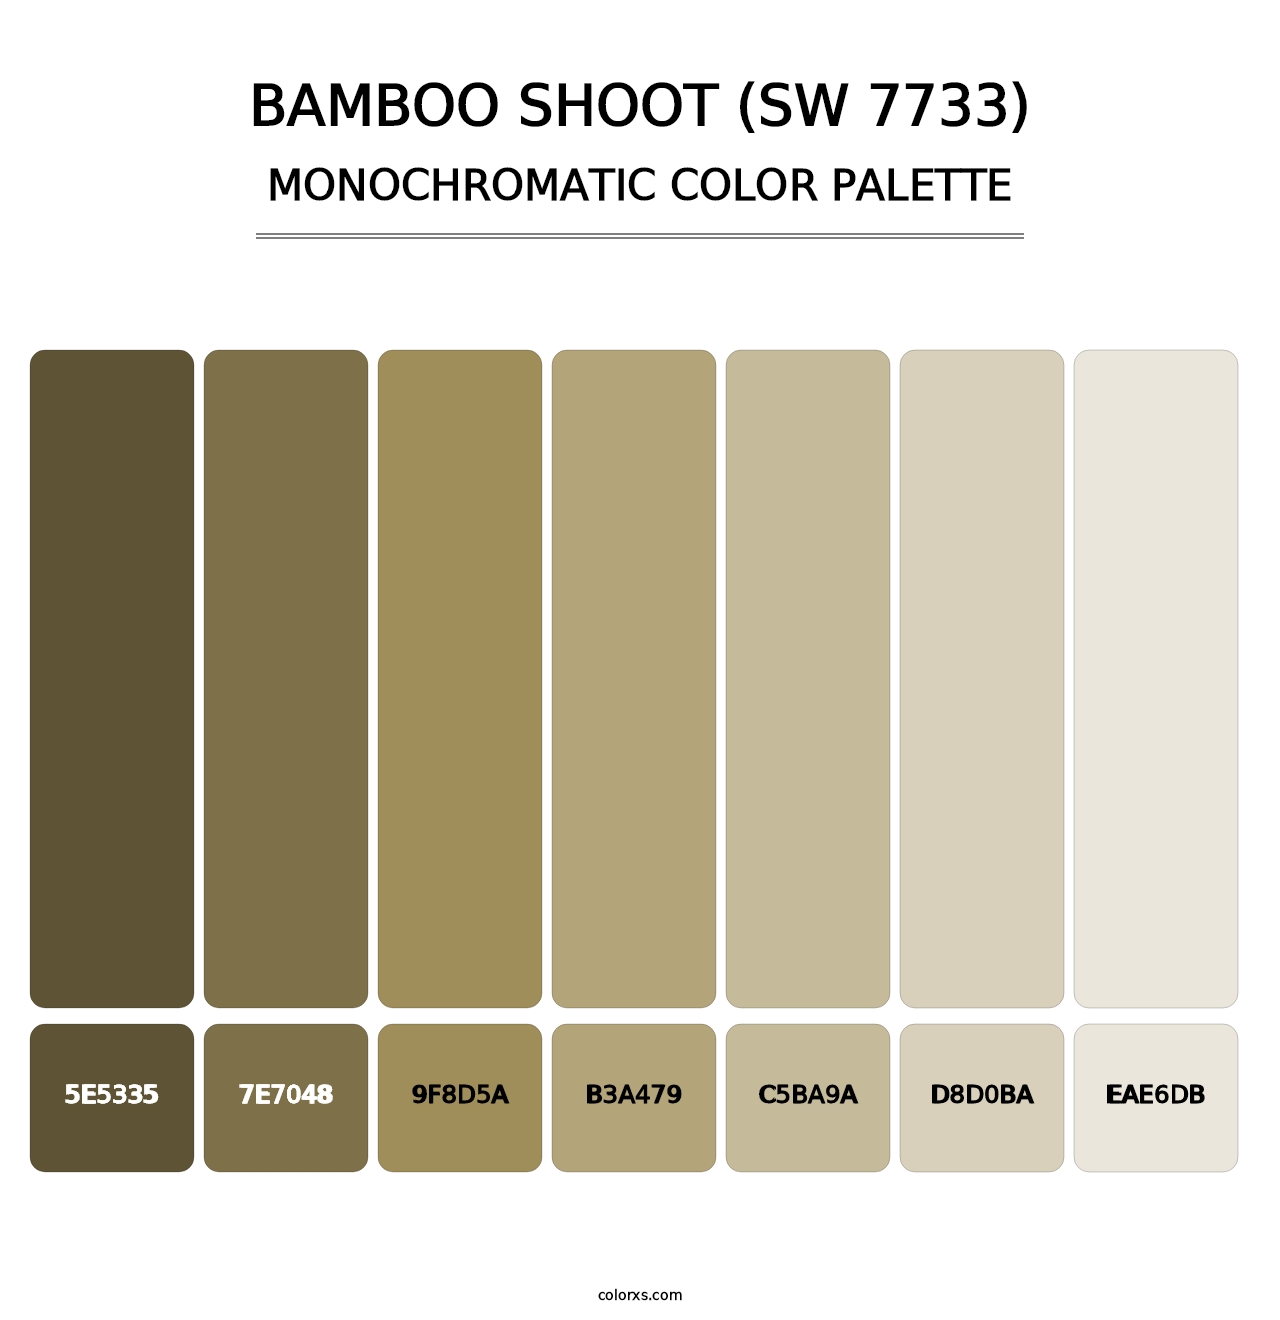 Bamboo Shoot (SW 7733) - Monochromatic Color Palette